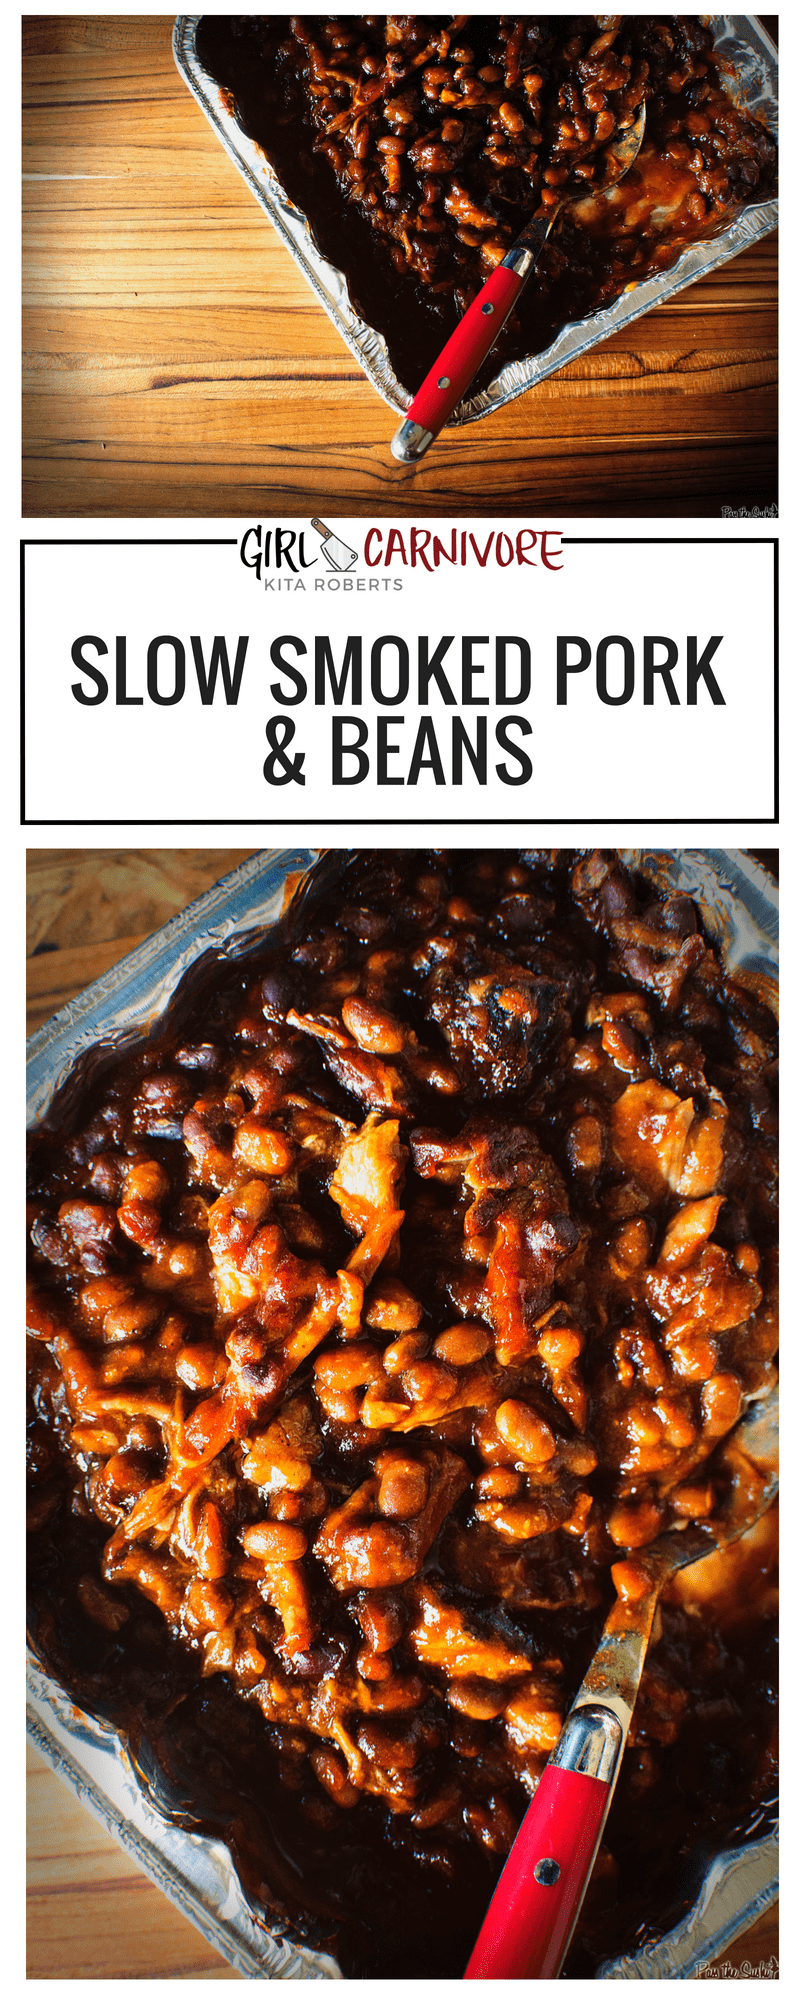 Slow Smoked Pork and Beans